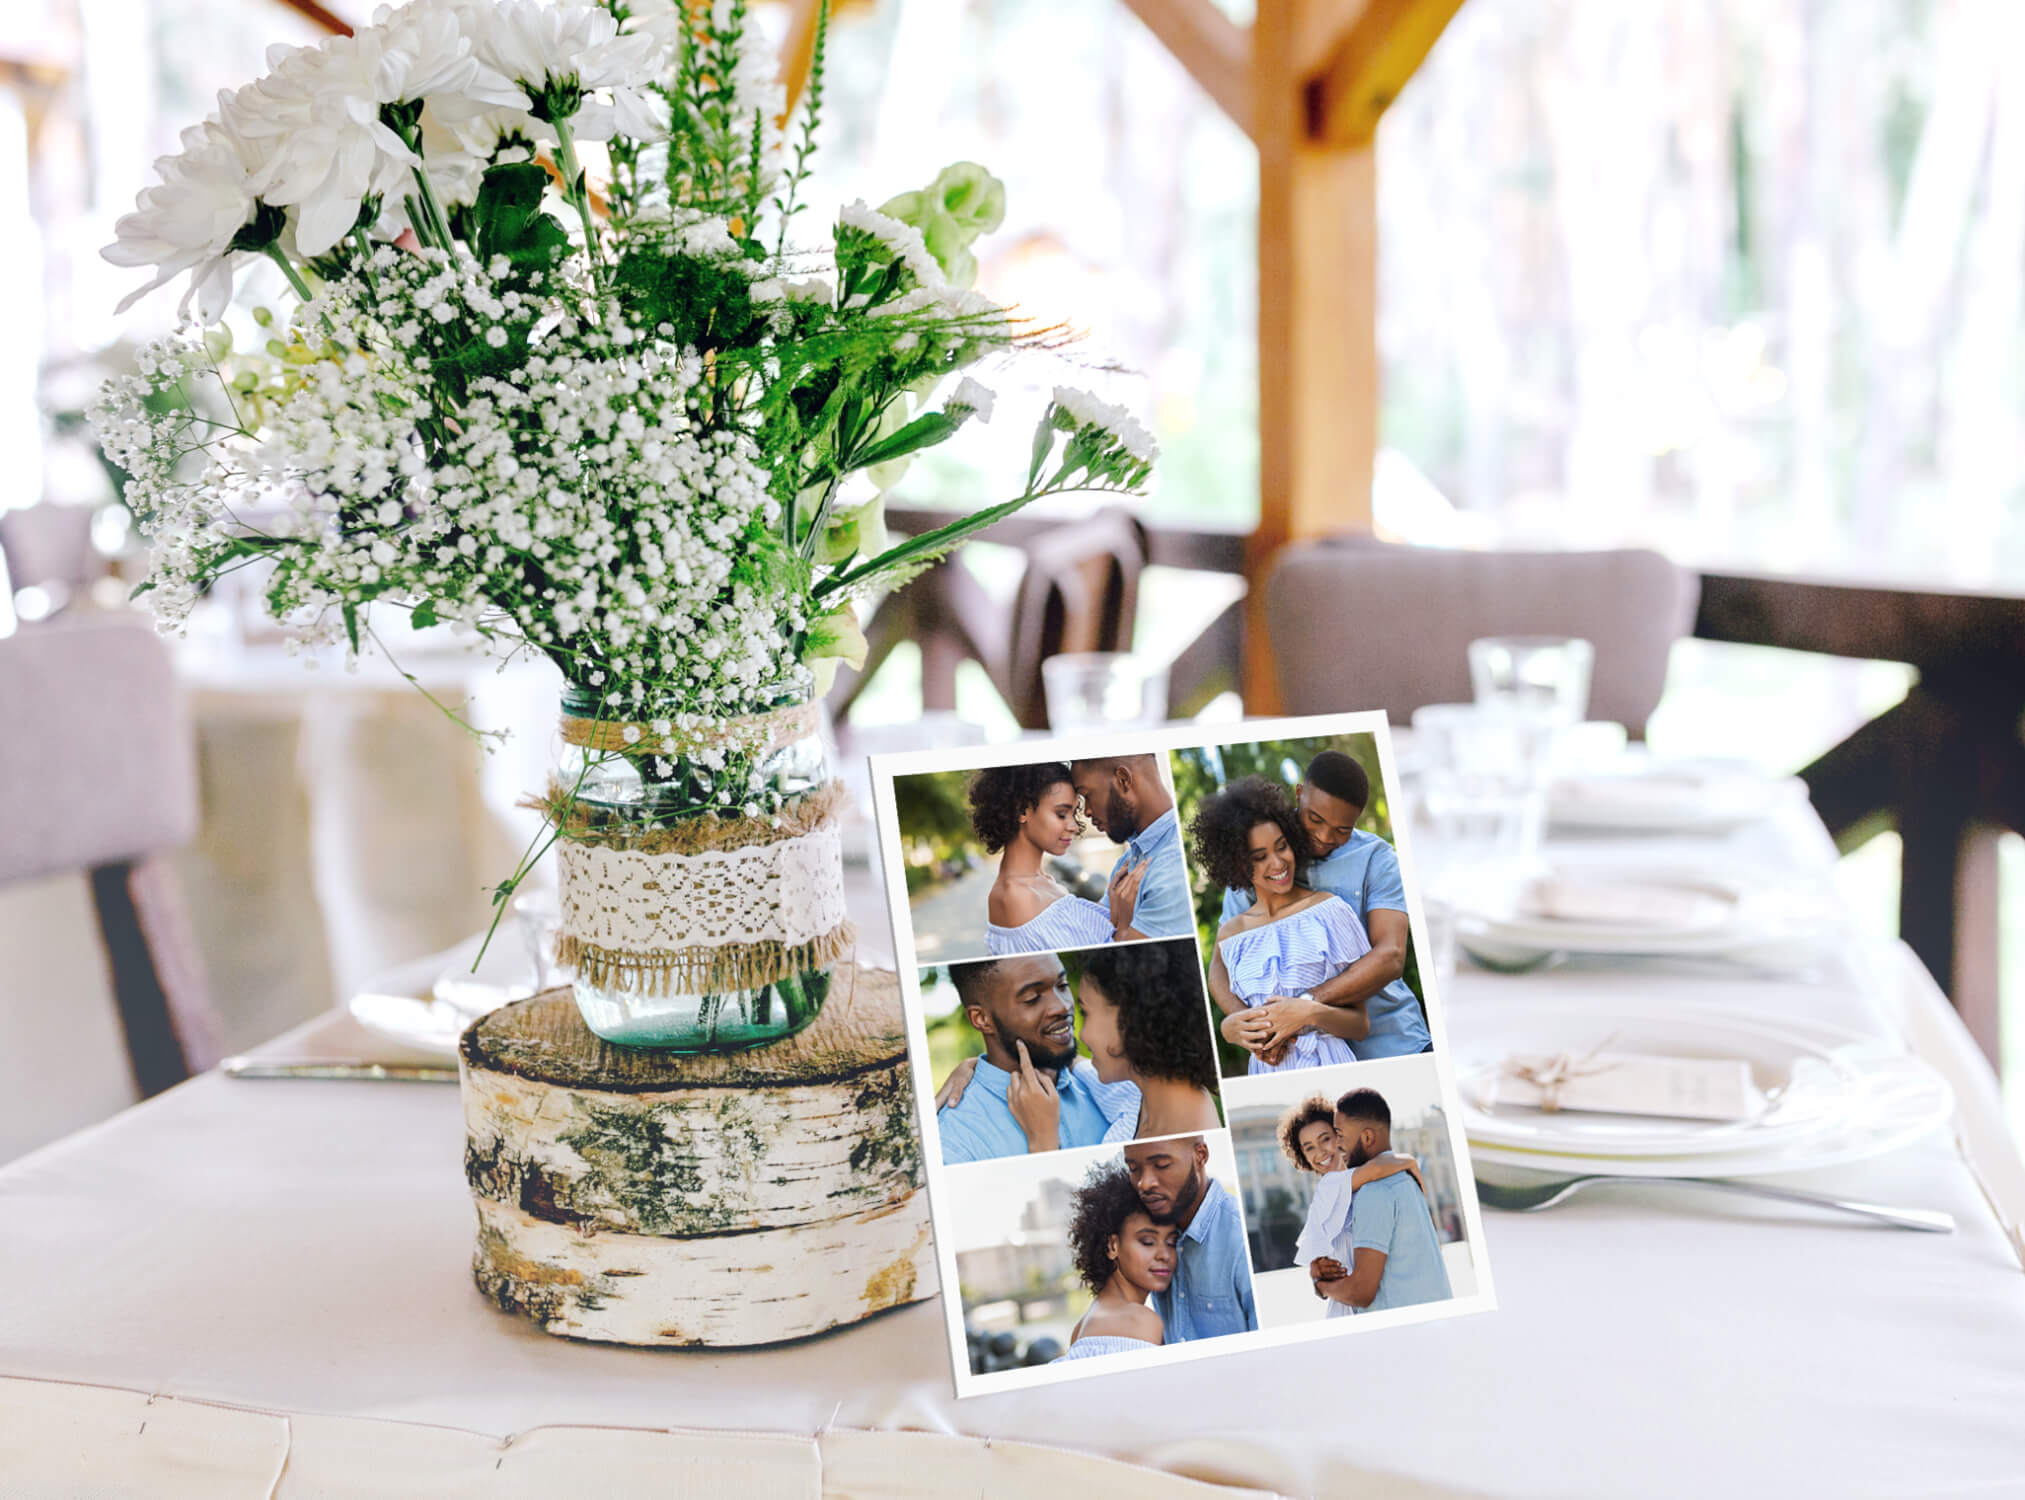 7 Picture Perfect Photo Gifts for Mom